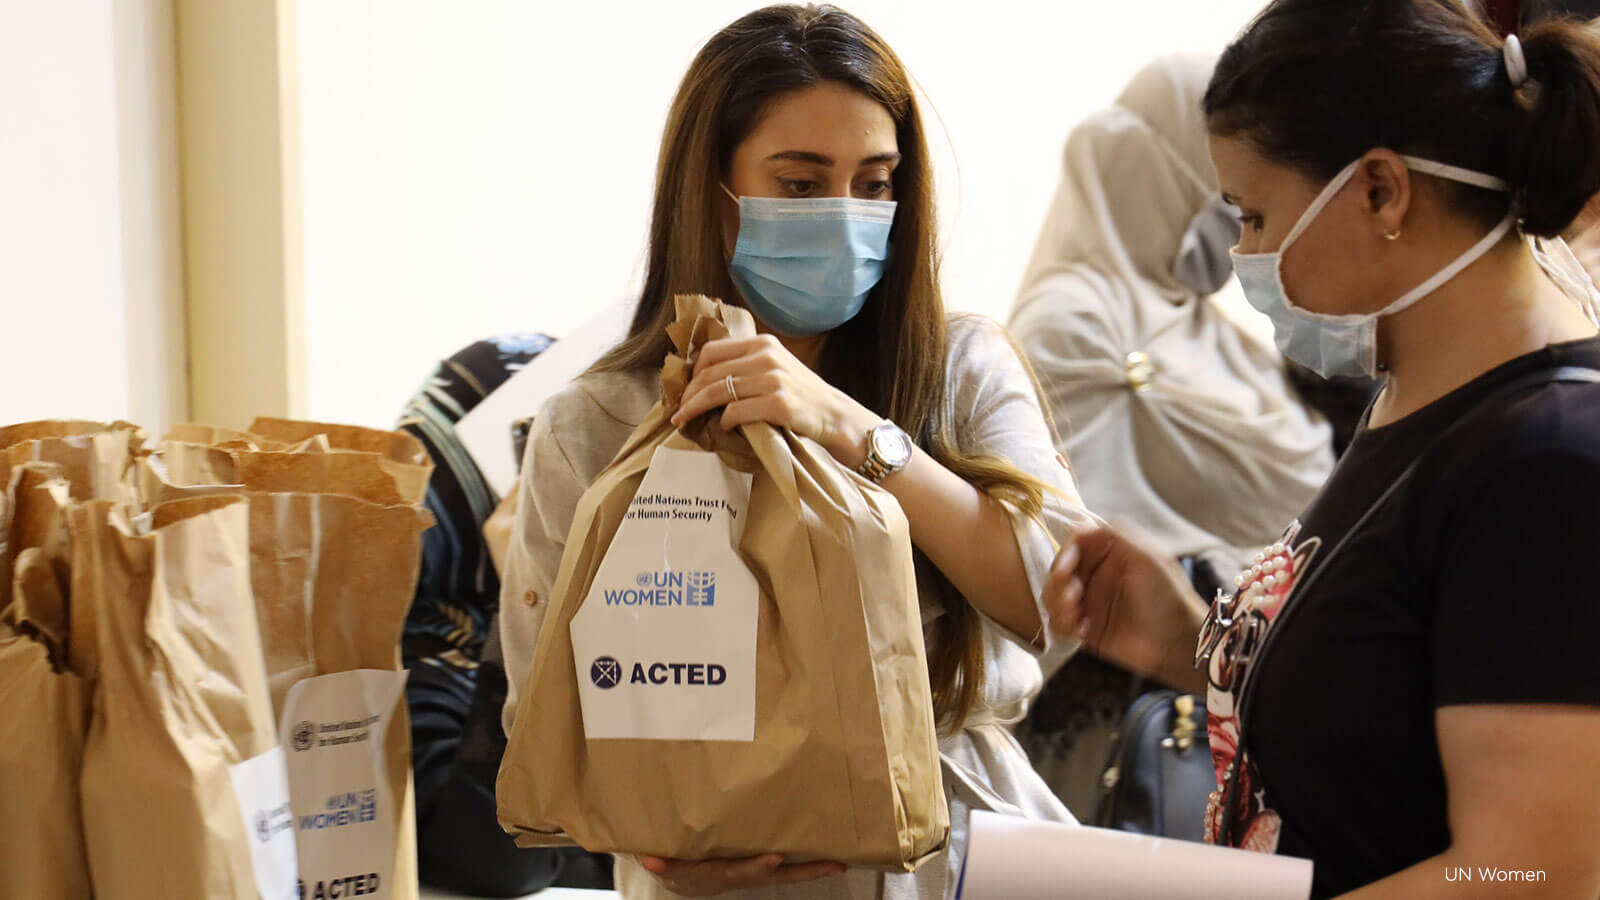 Workers on behalf of ACTED and UN Women distribute COVID-19 hygiene and dignity kits for women and girls in Tripoli, Lebanon. Photo: UN Women.